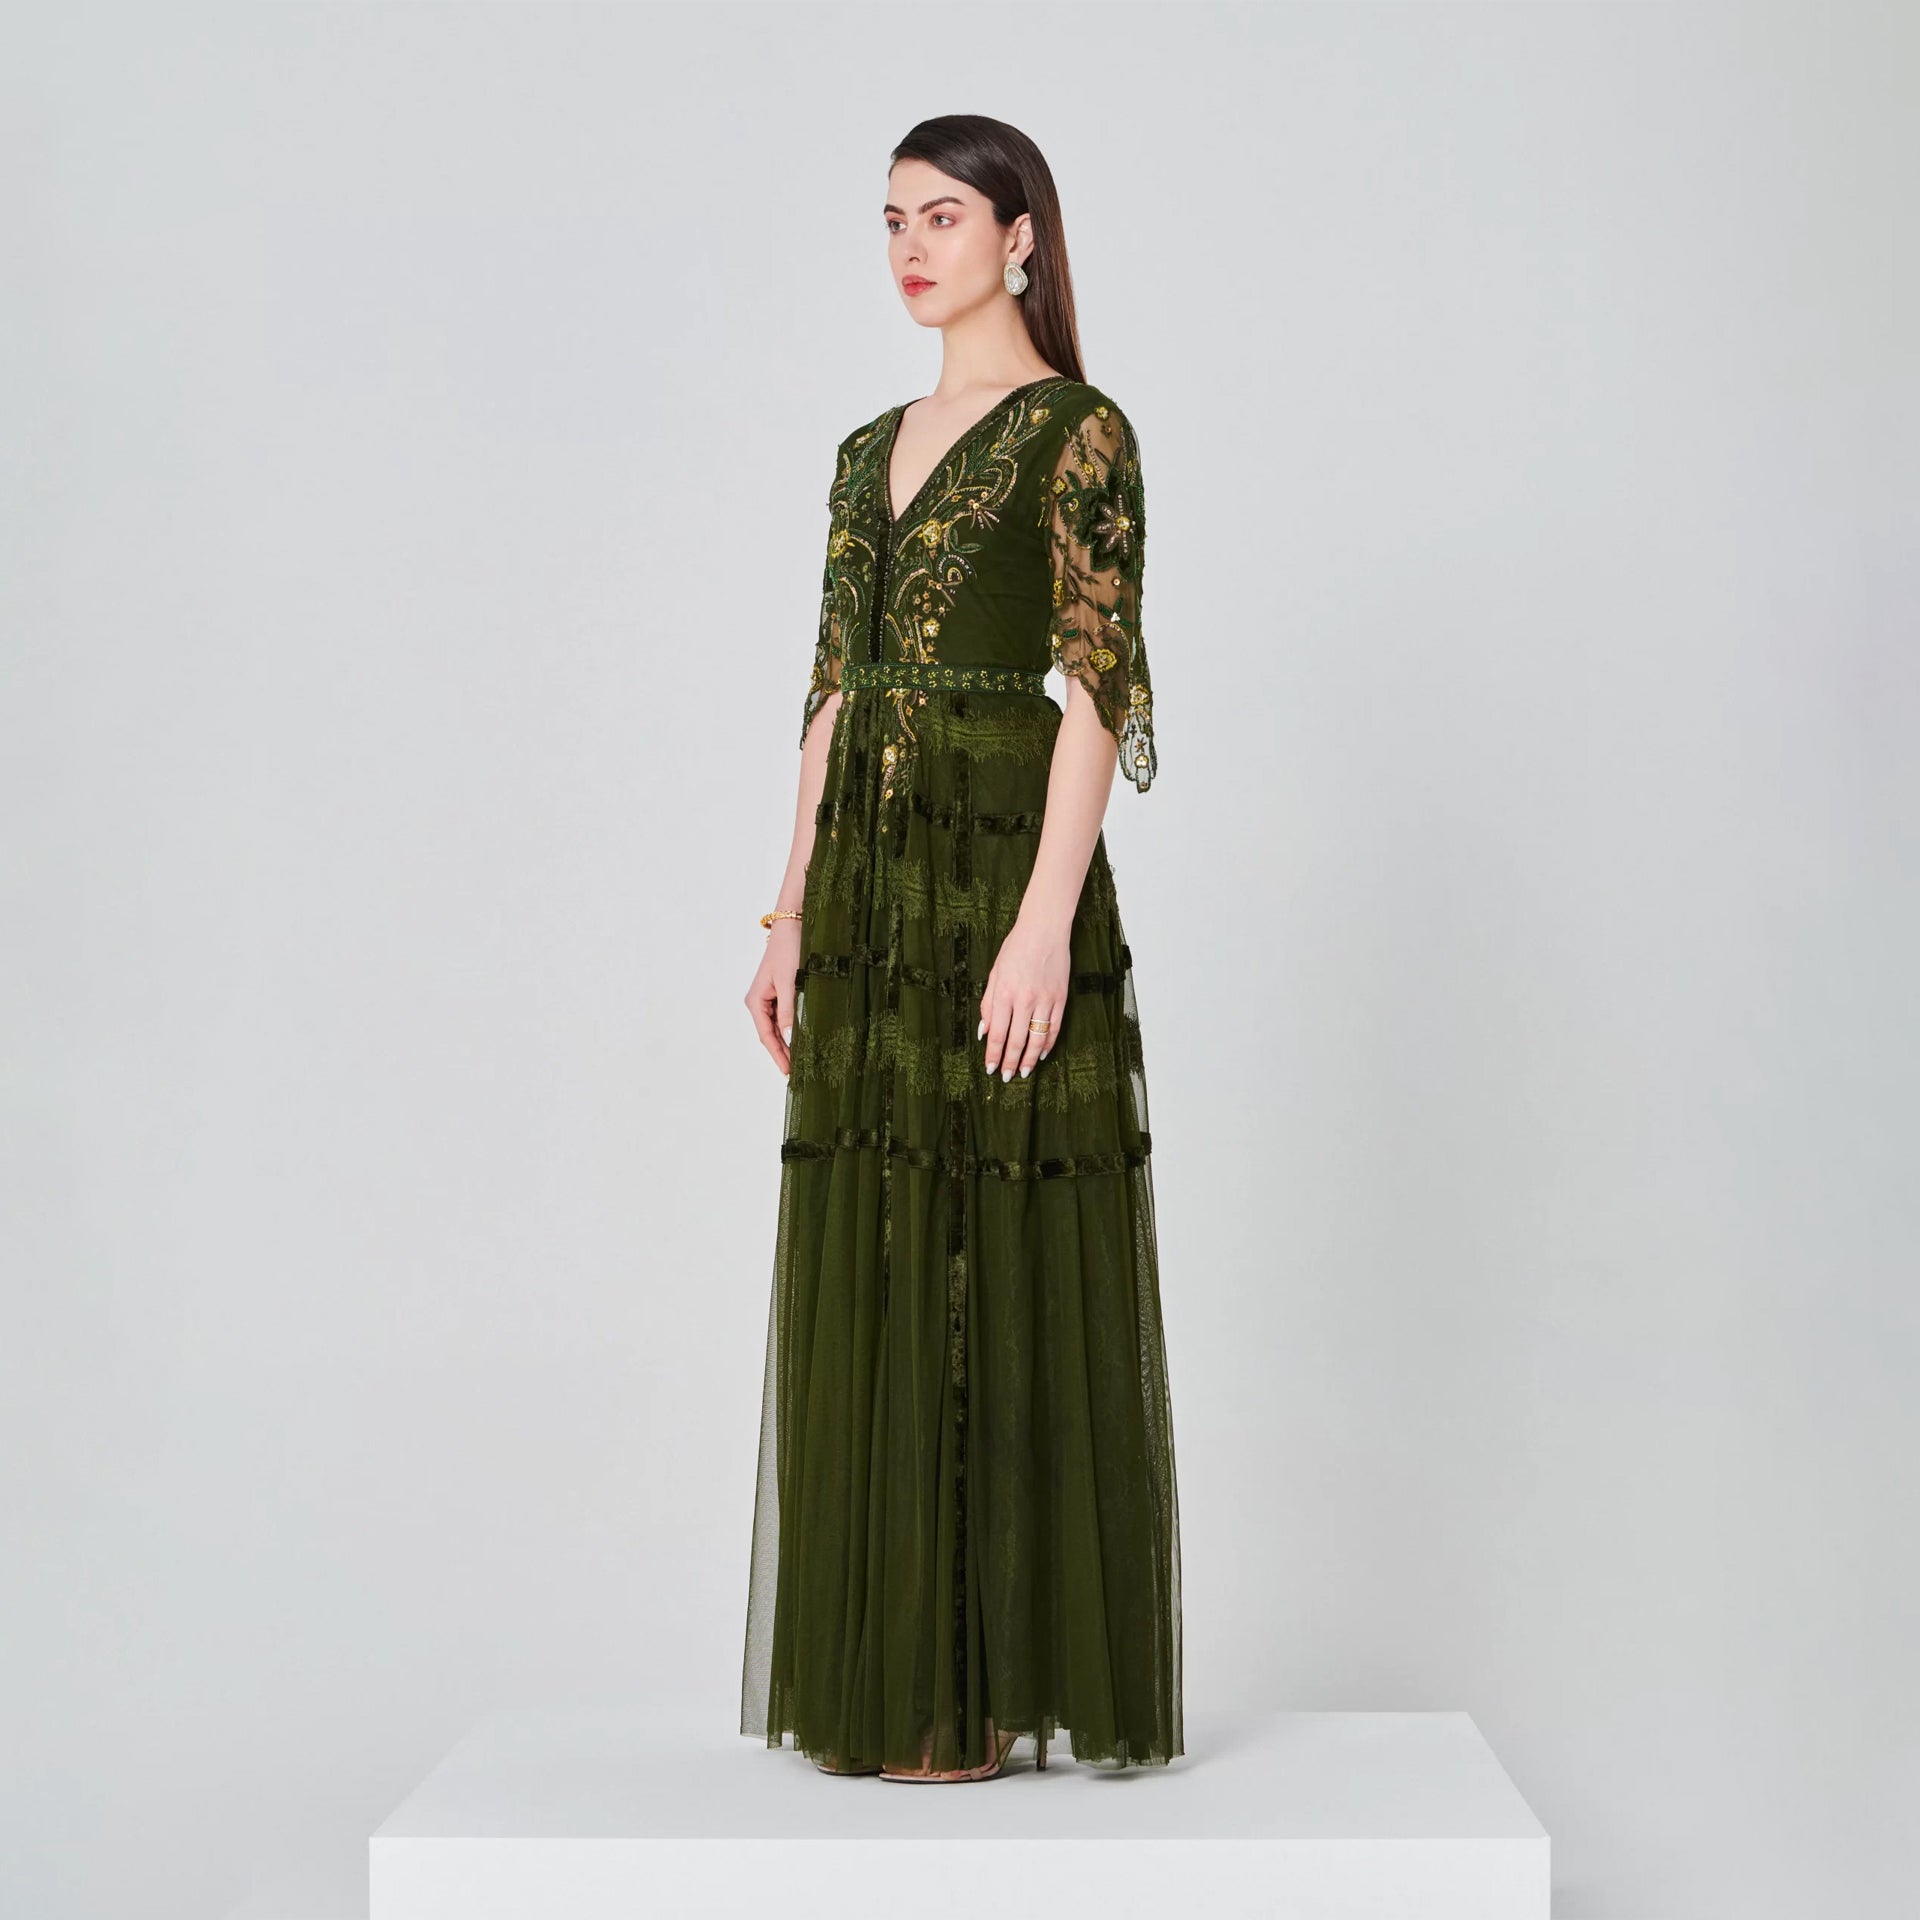 Olive Green Tulip Dress With Short Sleeves And Gold Embroidery From Shalky